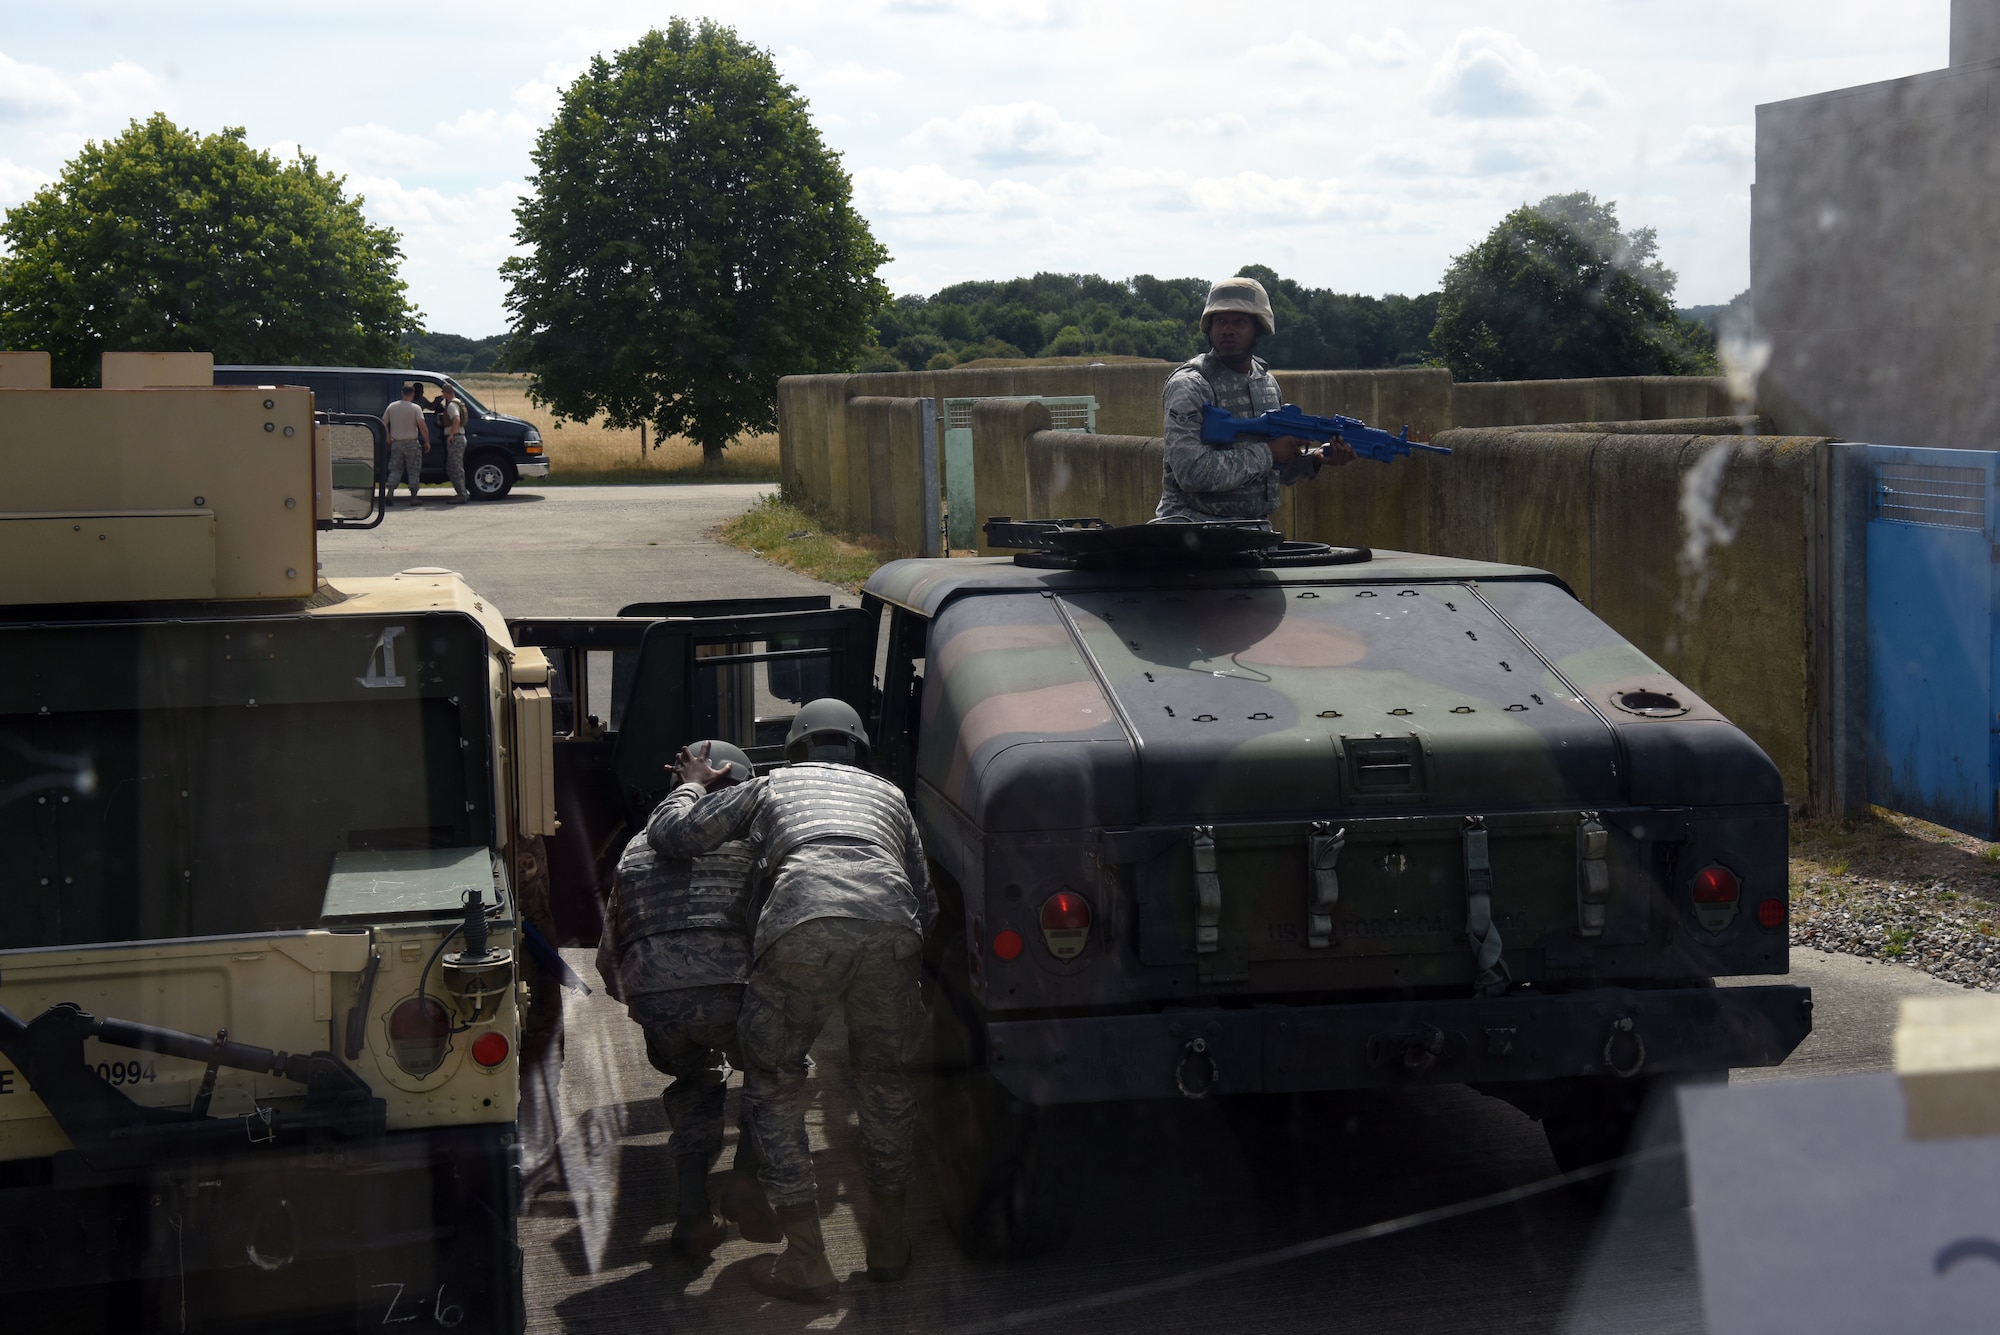 Ground transportation specialists assigned to the 48th Logistics Readiness Squadron and 100th Logistics Readiness Squadron transport simulated wounded from a disabled Humvee after an improvised explosive device roadside bomb detonation at the Stanford Training Area, Suffolk, England, Aug. 4, 2018. Airmen from the ground transporation career field are required by their Air Force Instruction to conduct 100 hours of convoy training every two years. (U.S. Air Force photo/ Airman 1st Class John A. Crawford)